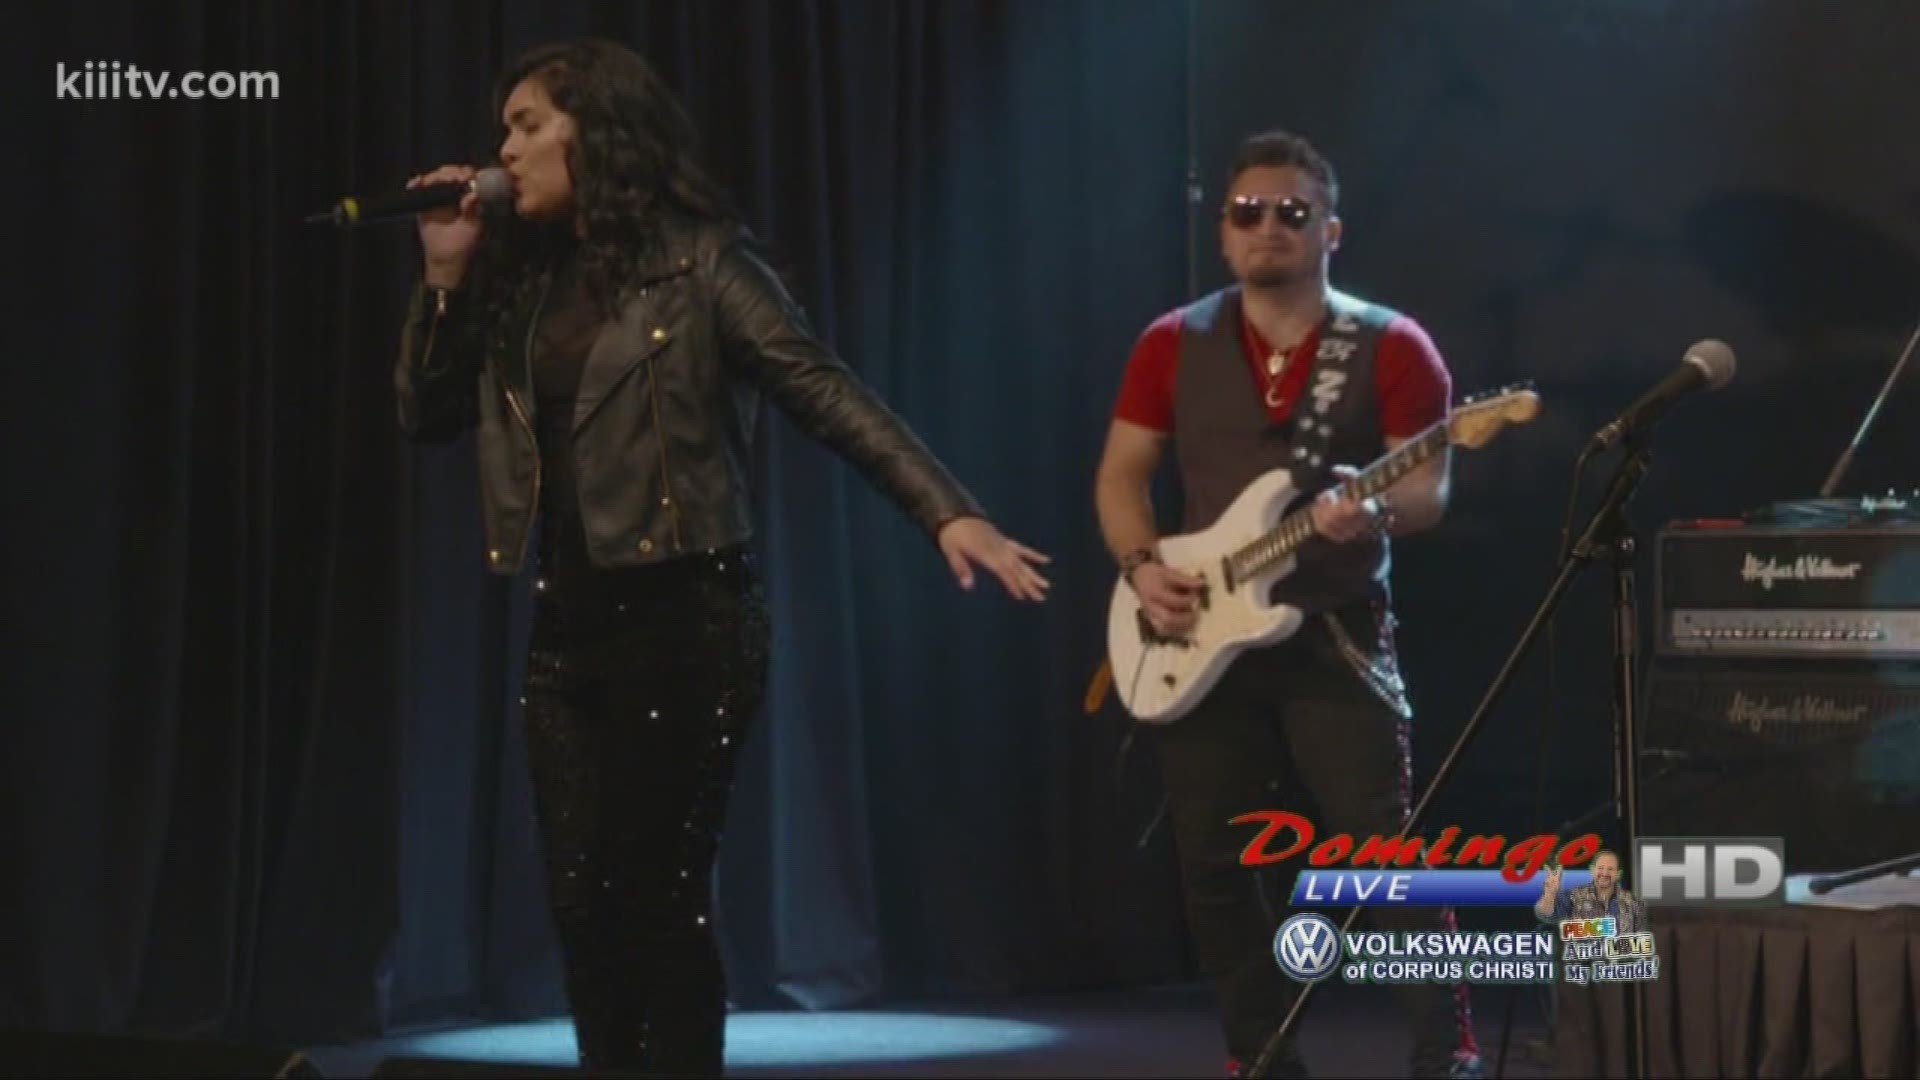 Isabel Marie performance "Ahora Quiero Volver", courtesy of Q-Productions, on Domingo Live.